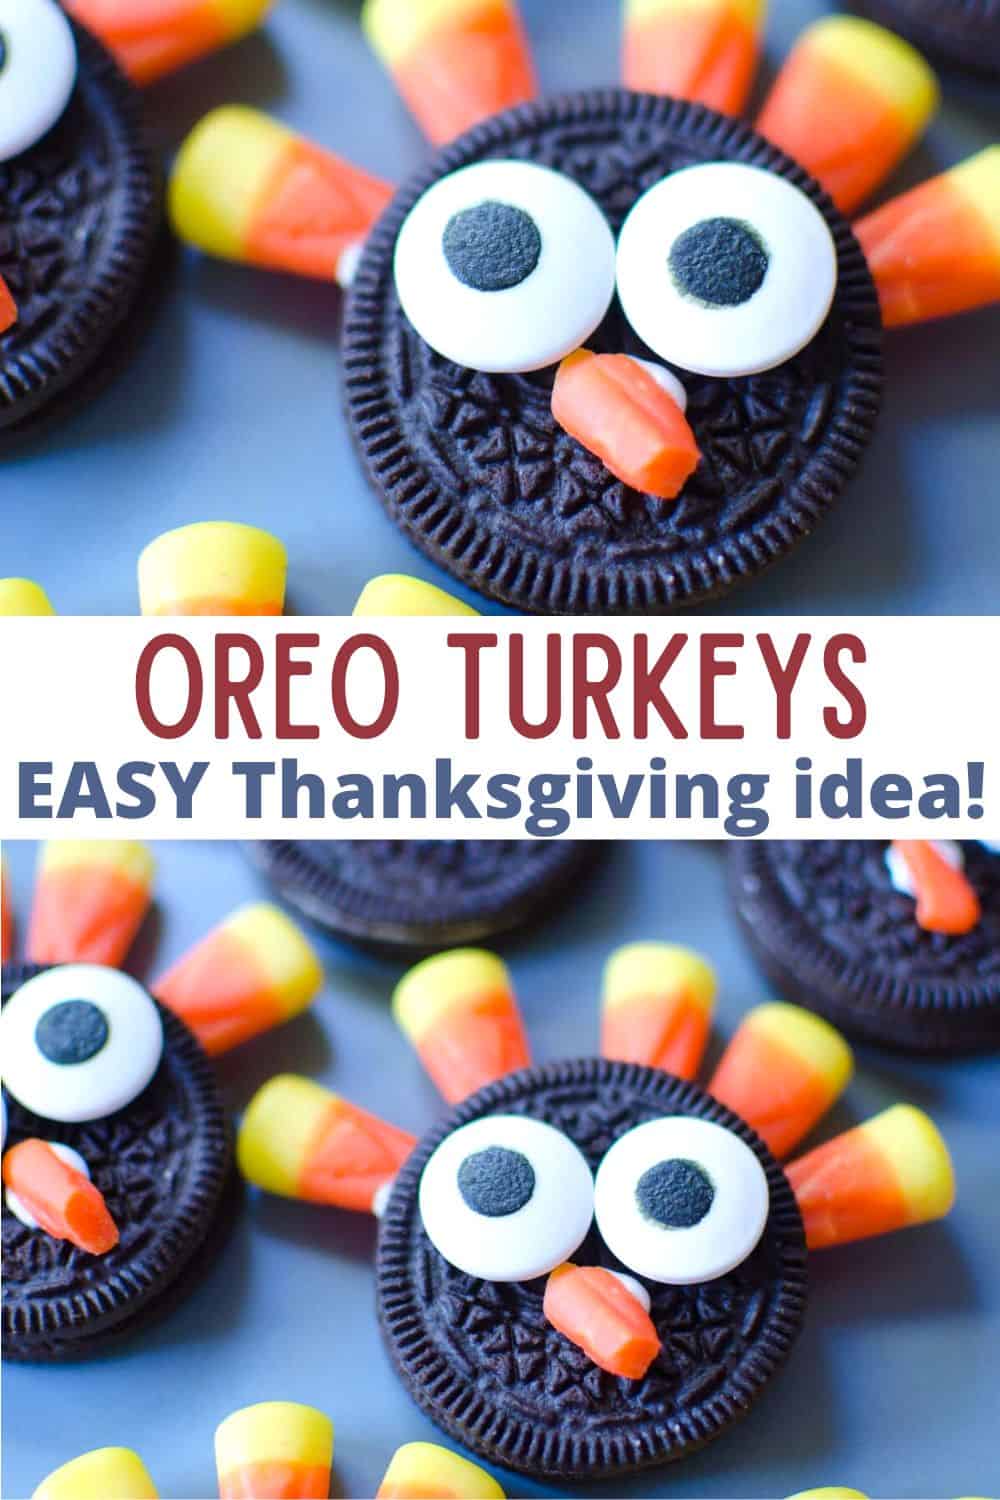 Make Thanksgiving OREO Turkeys with this simple step-by-step using just FOUR ingredients! A fun Thanksgiving snack the kids can make!